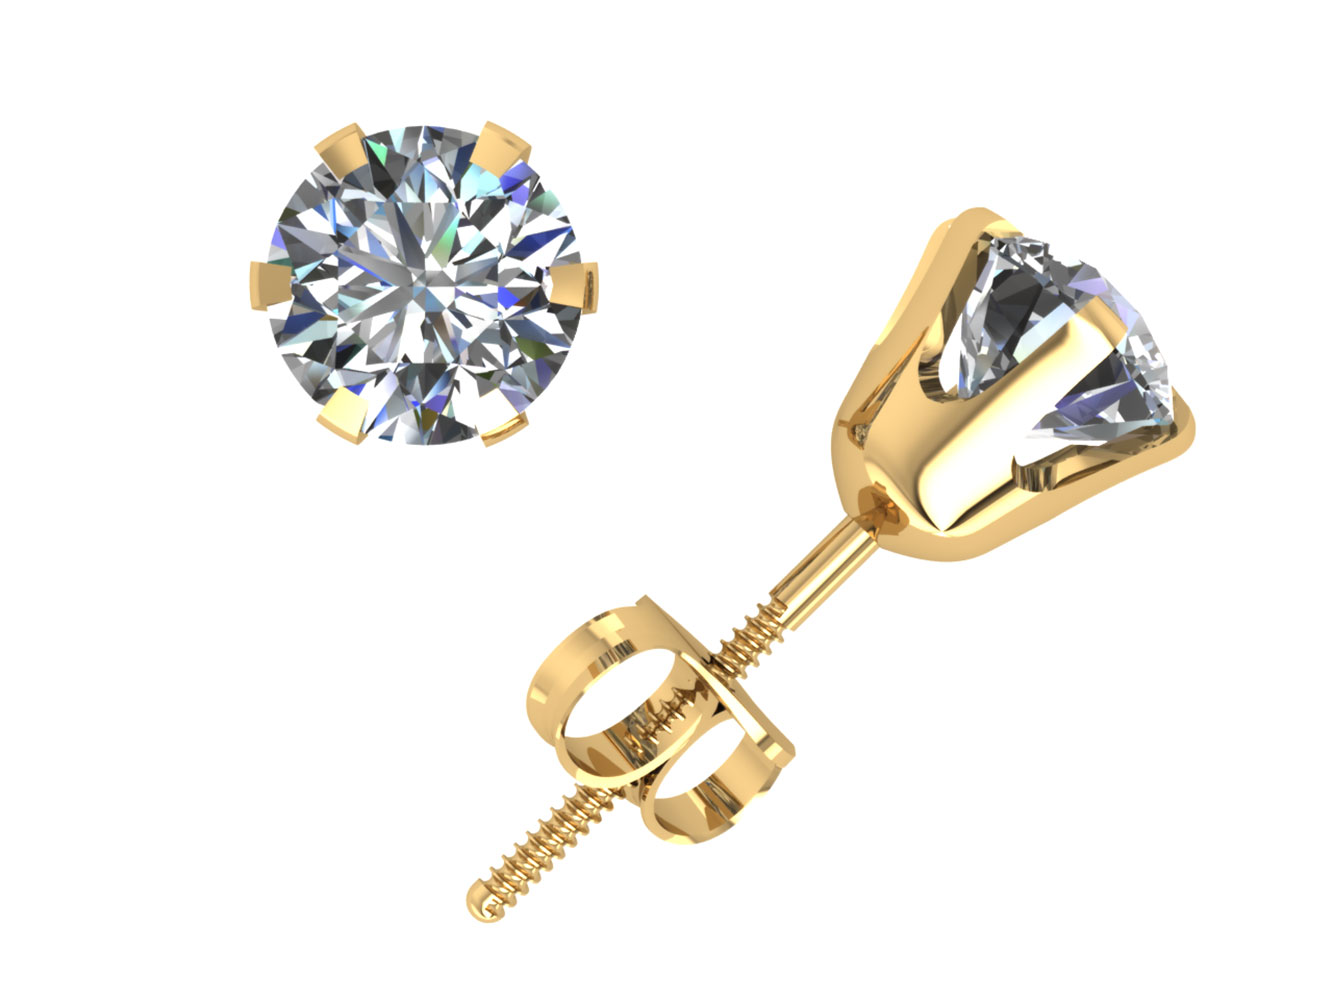 Jewel We Sell 1.50Ctw Round Cut Diamond Stud Earrings 14k White or Yellow Gold 6Prong ScrewBack H SI2